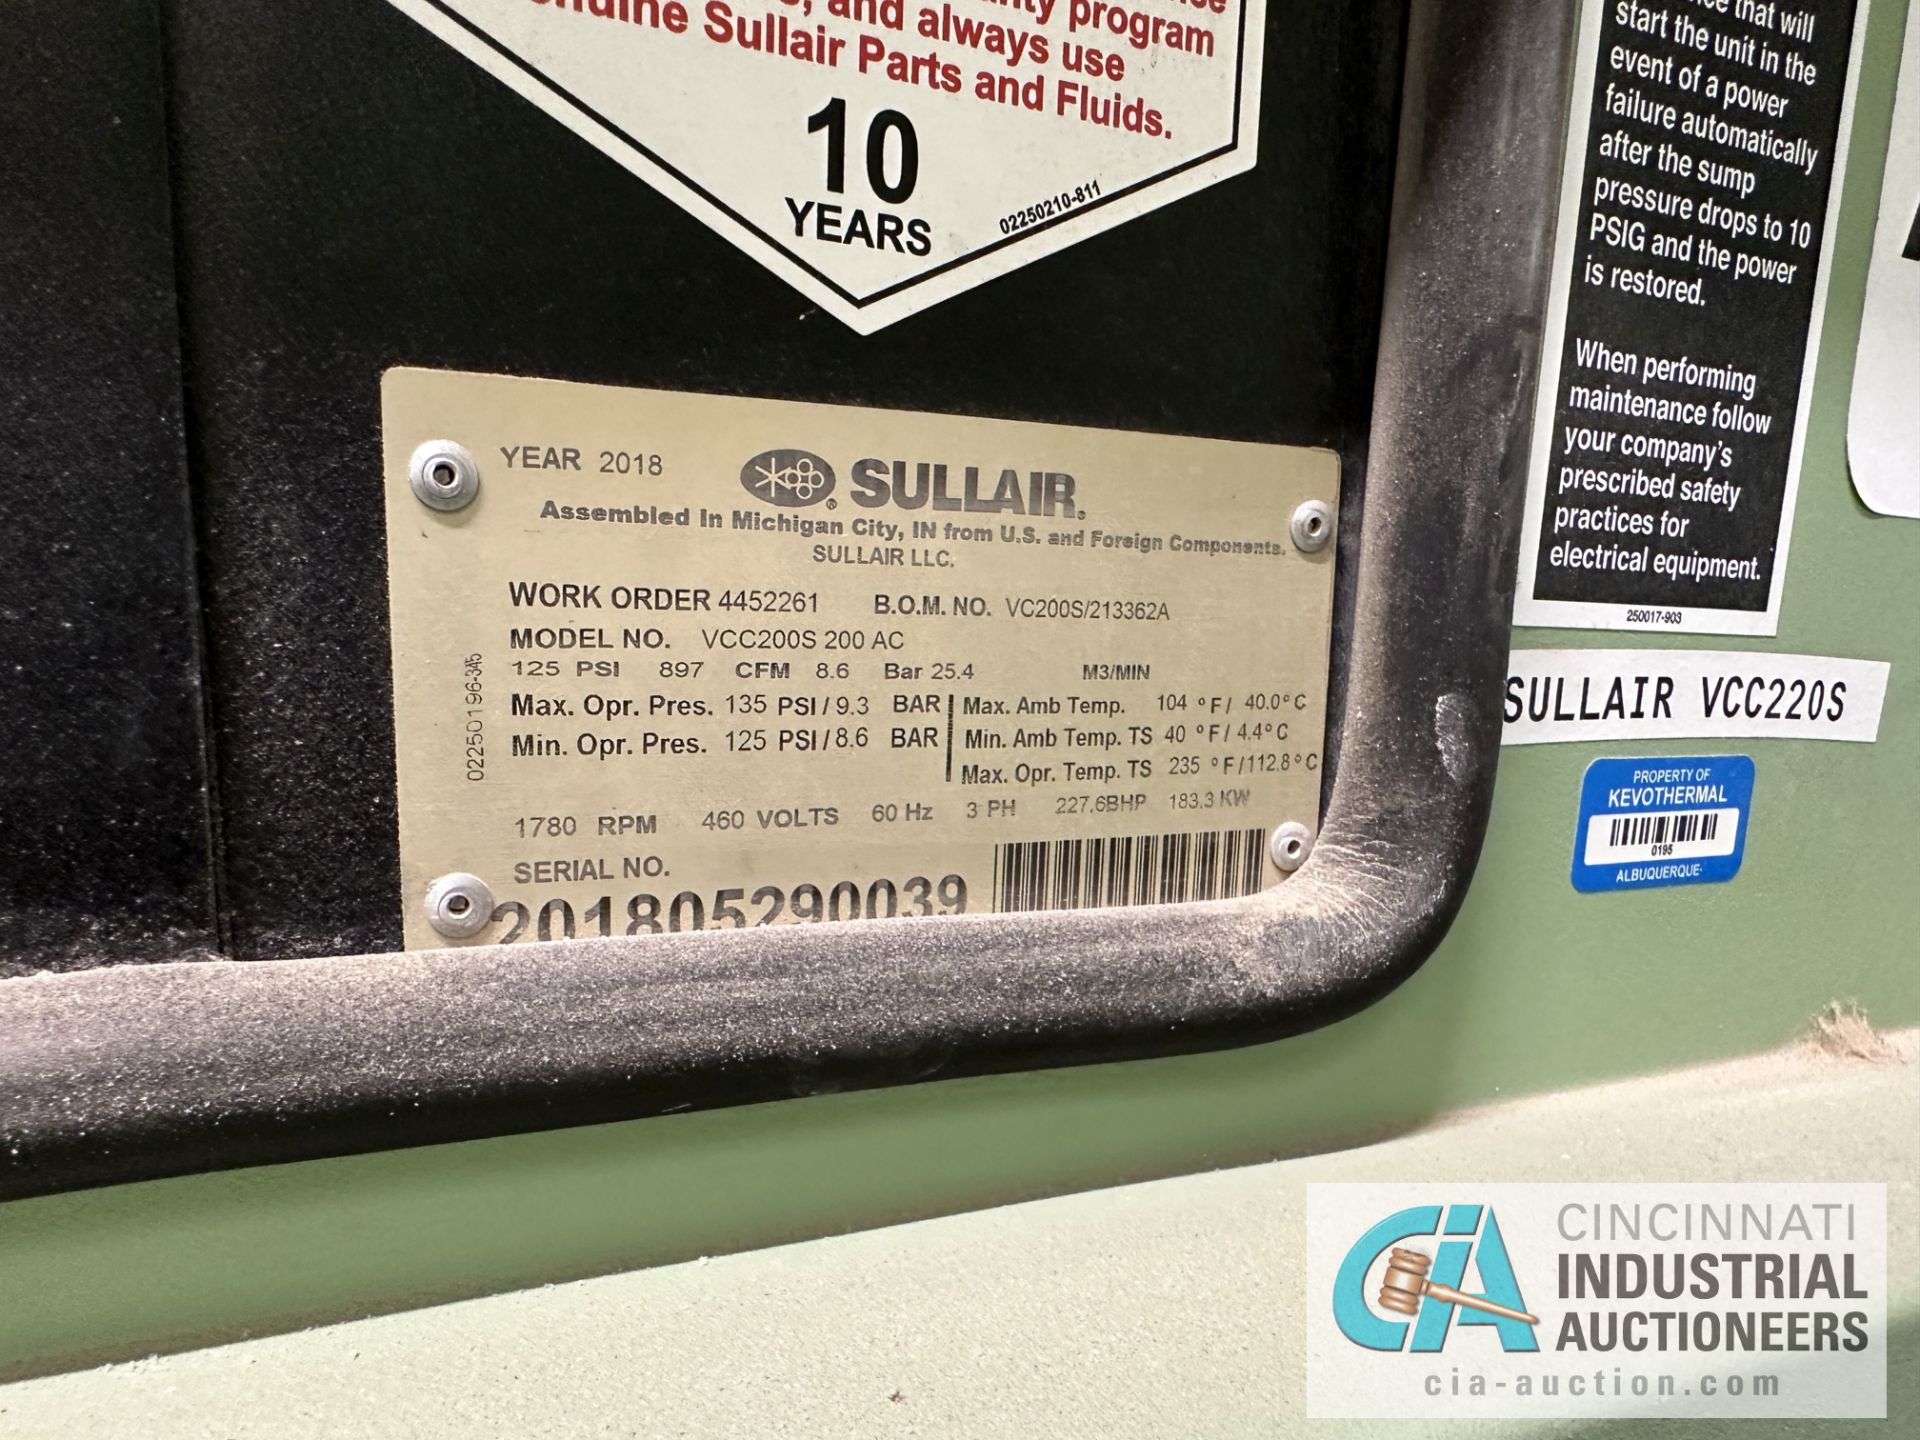 200 H.P. SULLAIR MODEL VCC2005 ROTARY SCREW AIR COMPRESSOR S/N 201805290039 3 PHASE, 460 VOLTS, 1780 - Image 3 of 7